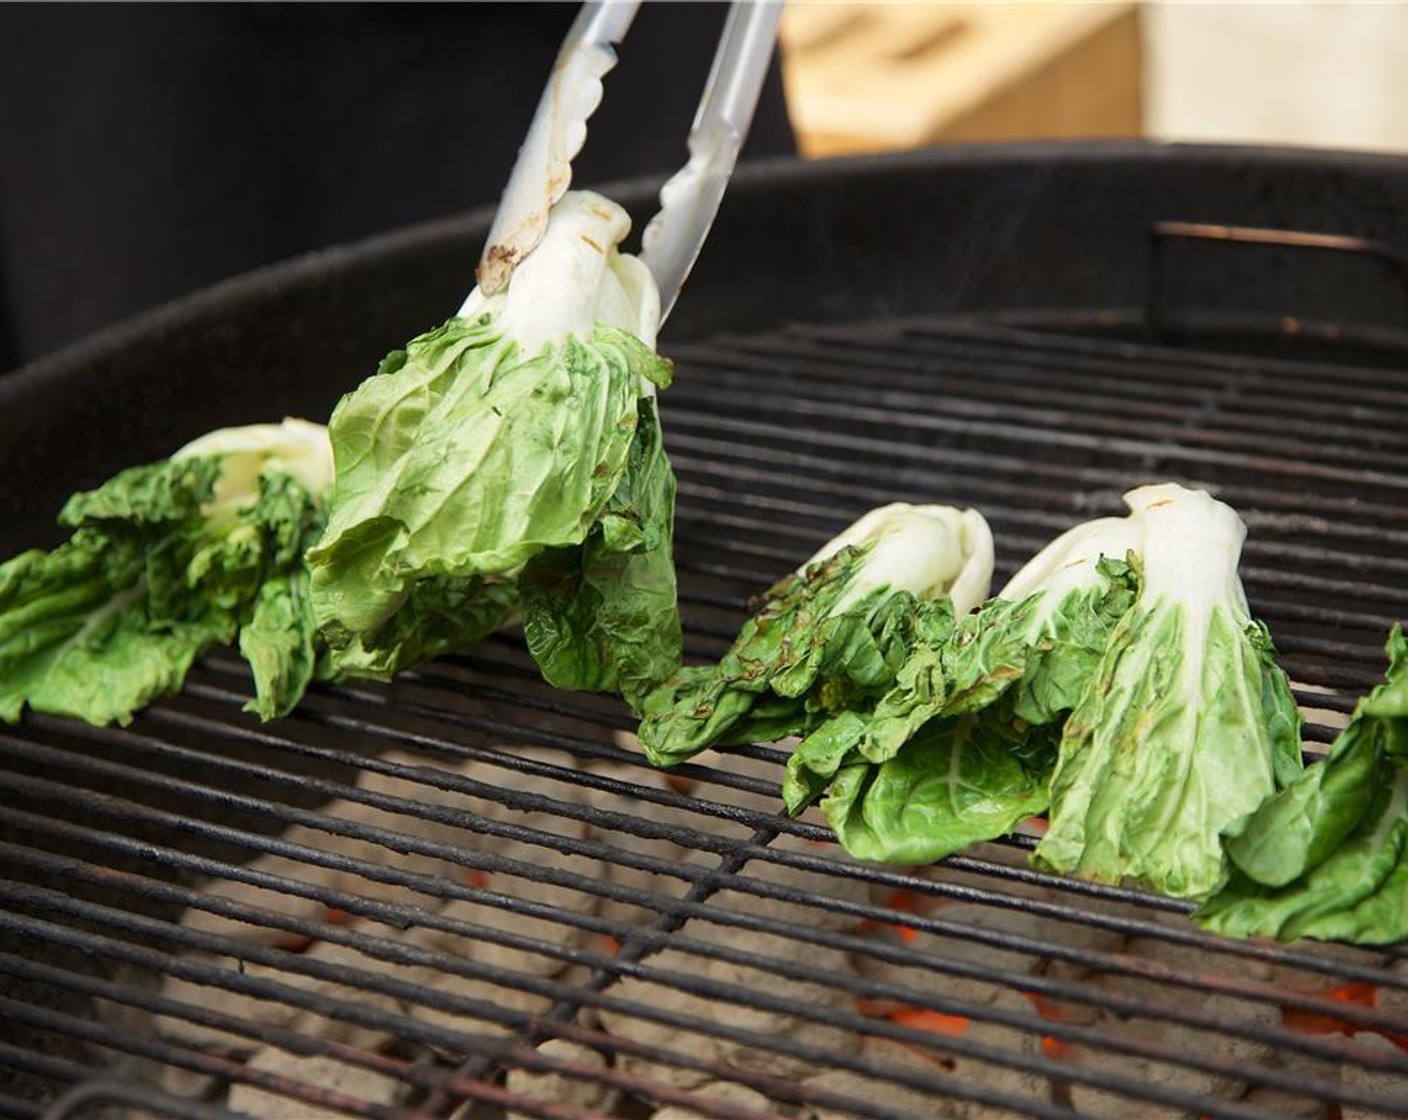 step 14 Place Choy Sum (12 oz) on the grill, keeping the dark leafy greens away from the hottest section of the grill. Cook the choi sum on each side for two minutes. Move to the cooler section of your grill to keep warm.